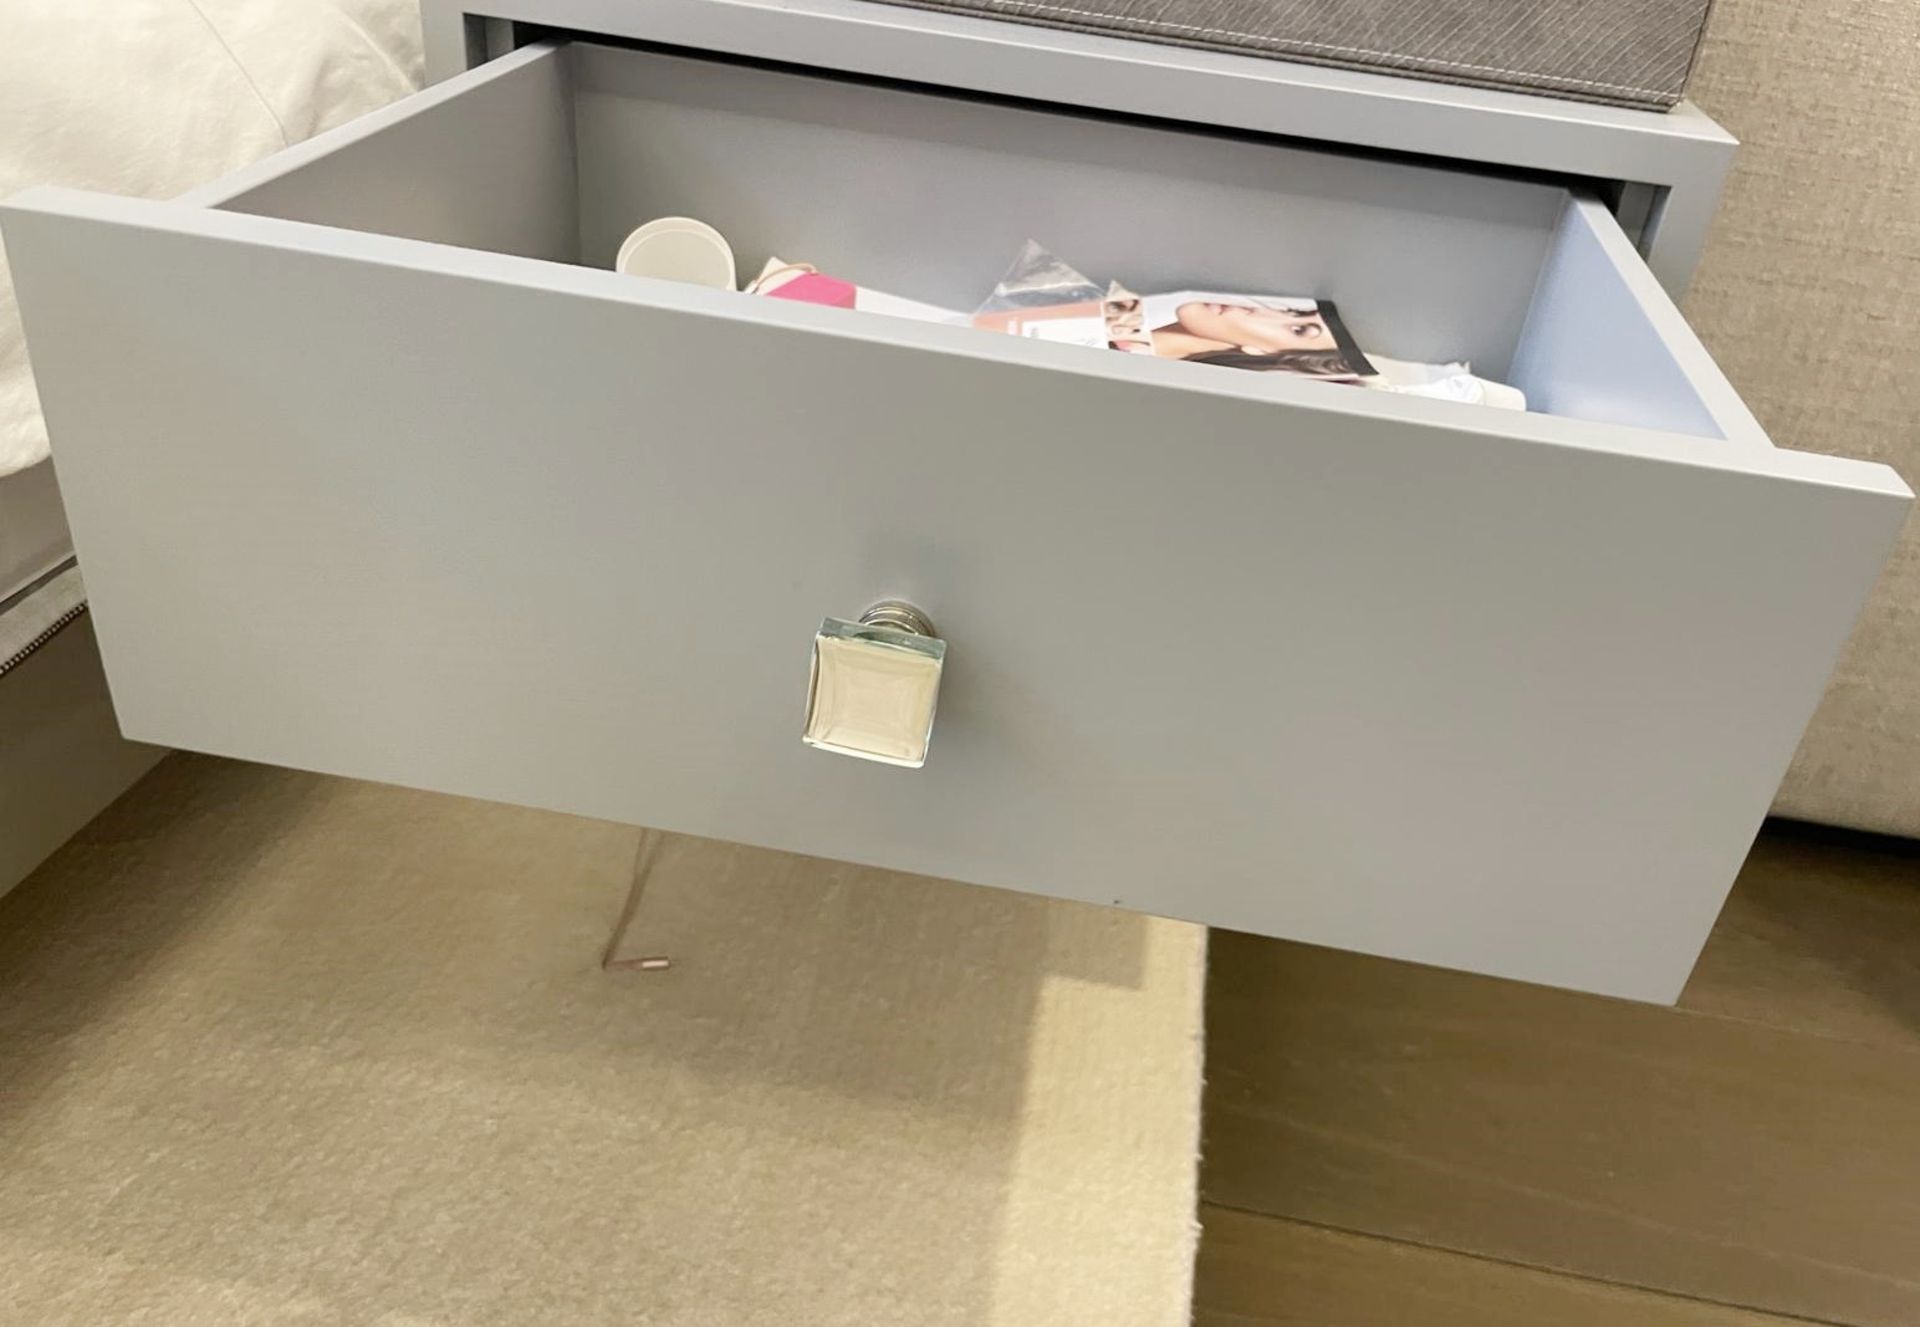 Pair of Stylish Wall Hung Bedside Drawers with a Grey Lacquer Finish and Glass Handles - Image 13 of 14